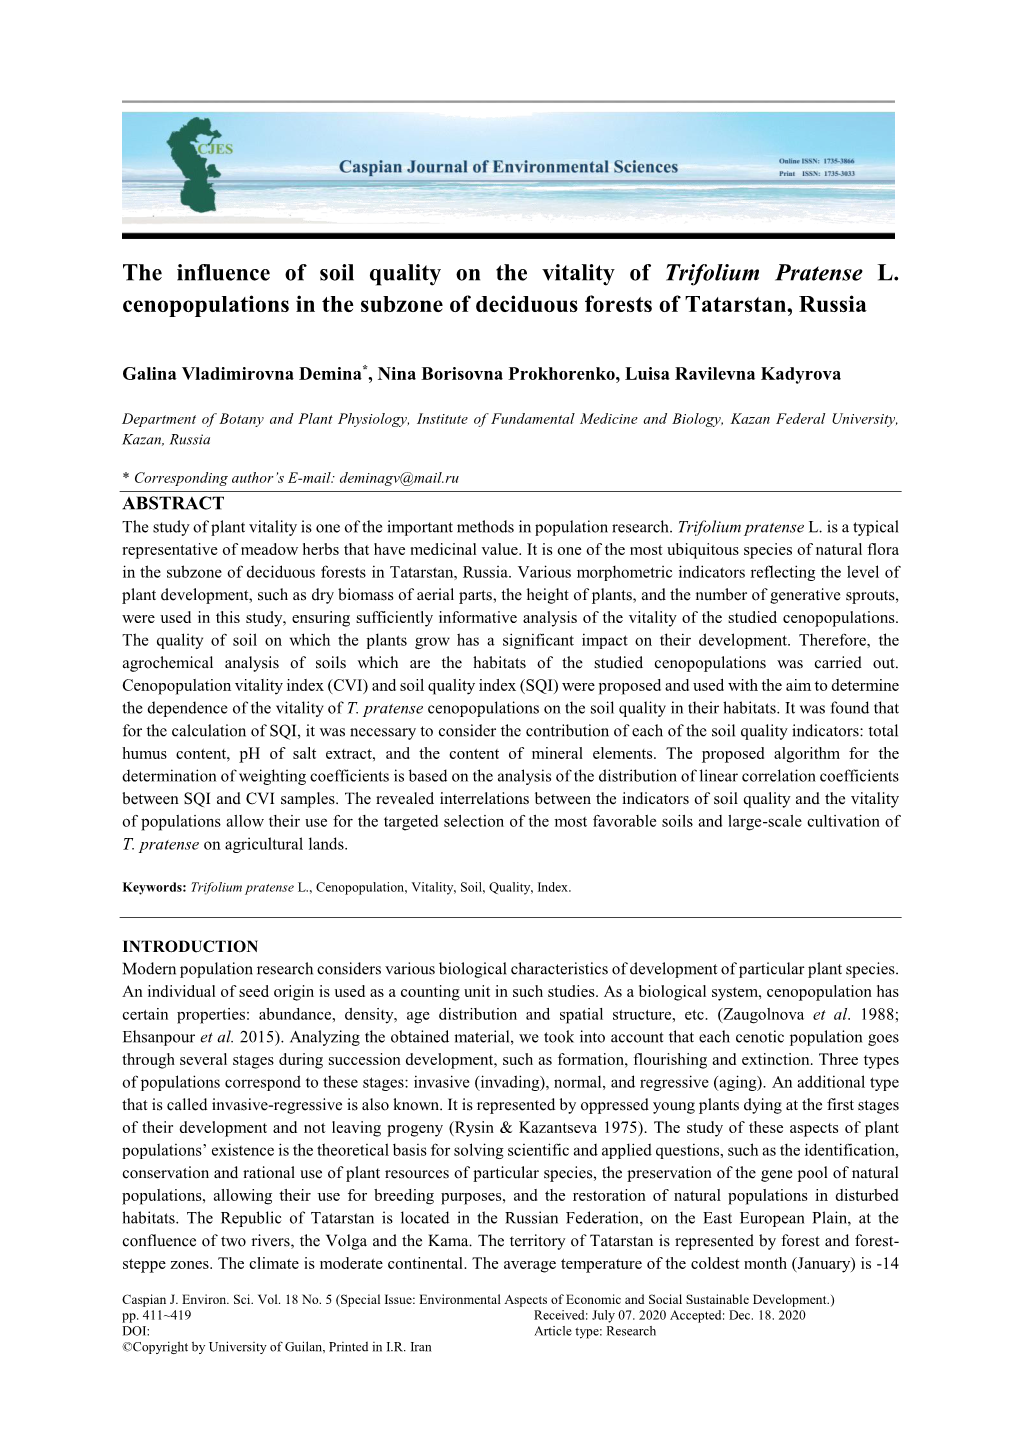 The Influence of Soil Quality on the Vitality of Trifolium Pratense L